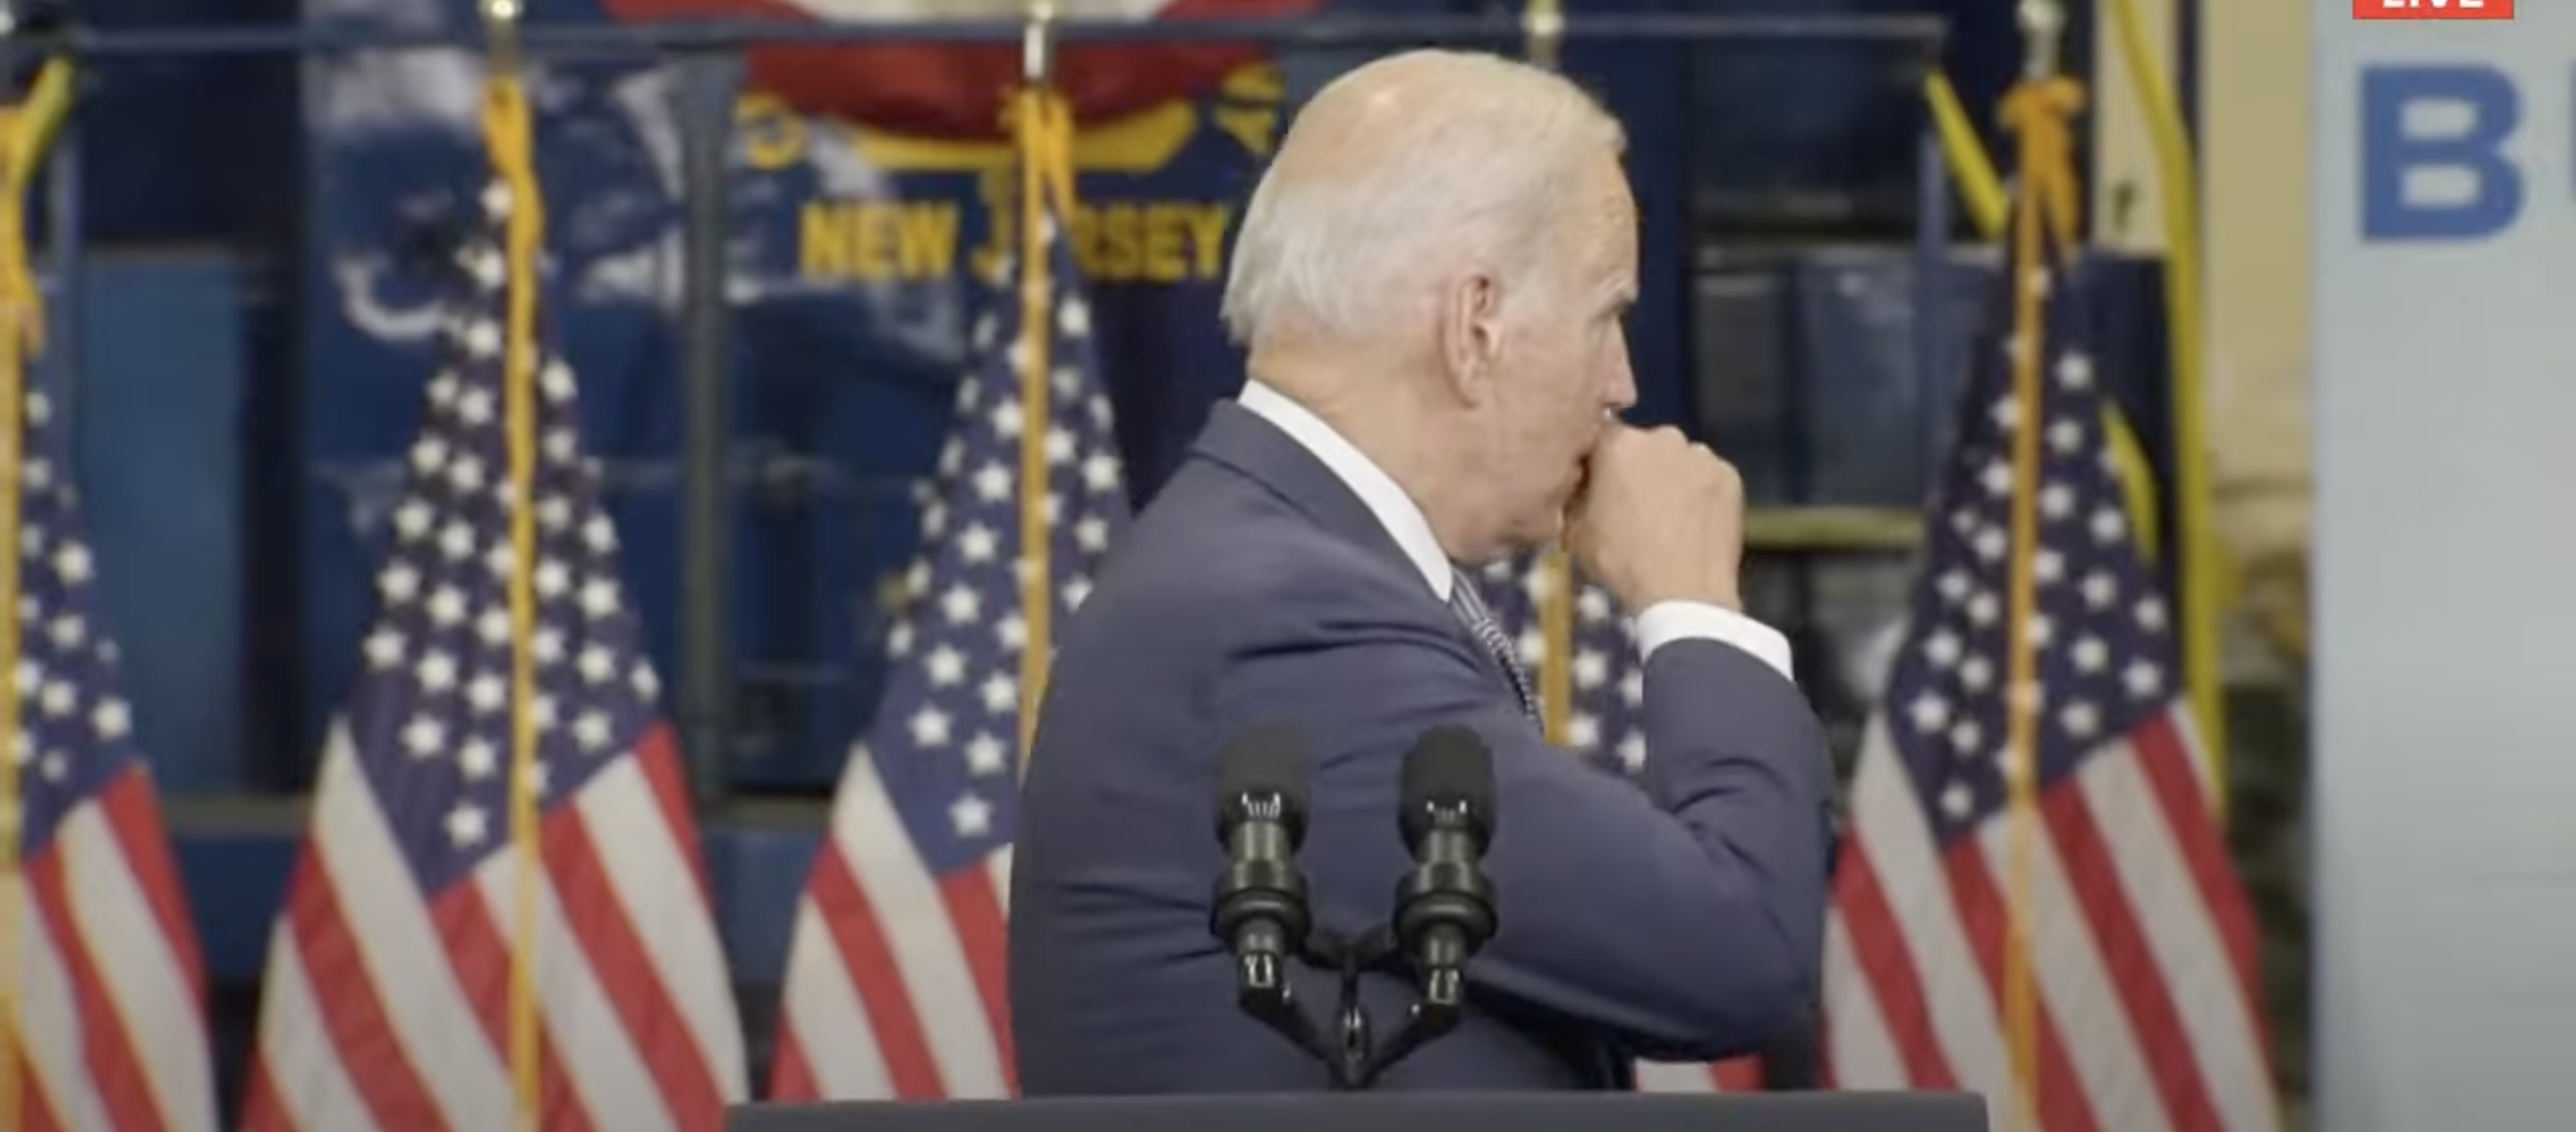 Maskless Biden Hacks A Cough Into His Hand, Then Greets People With Handshake